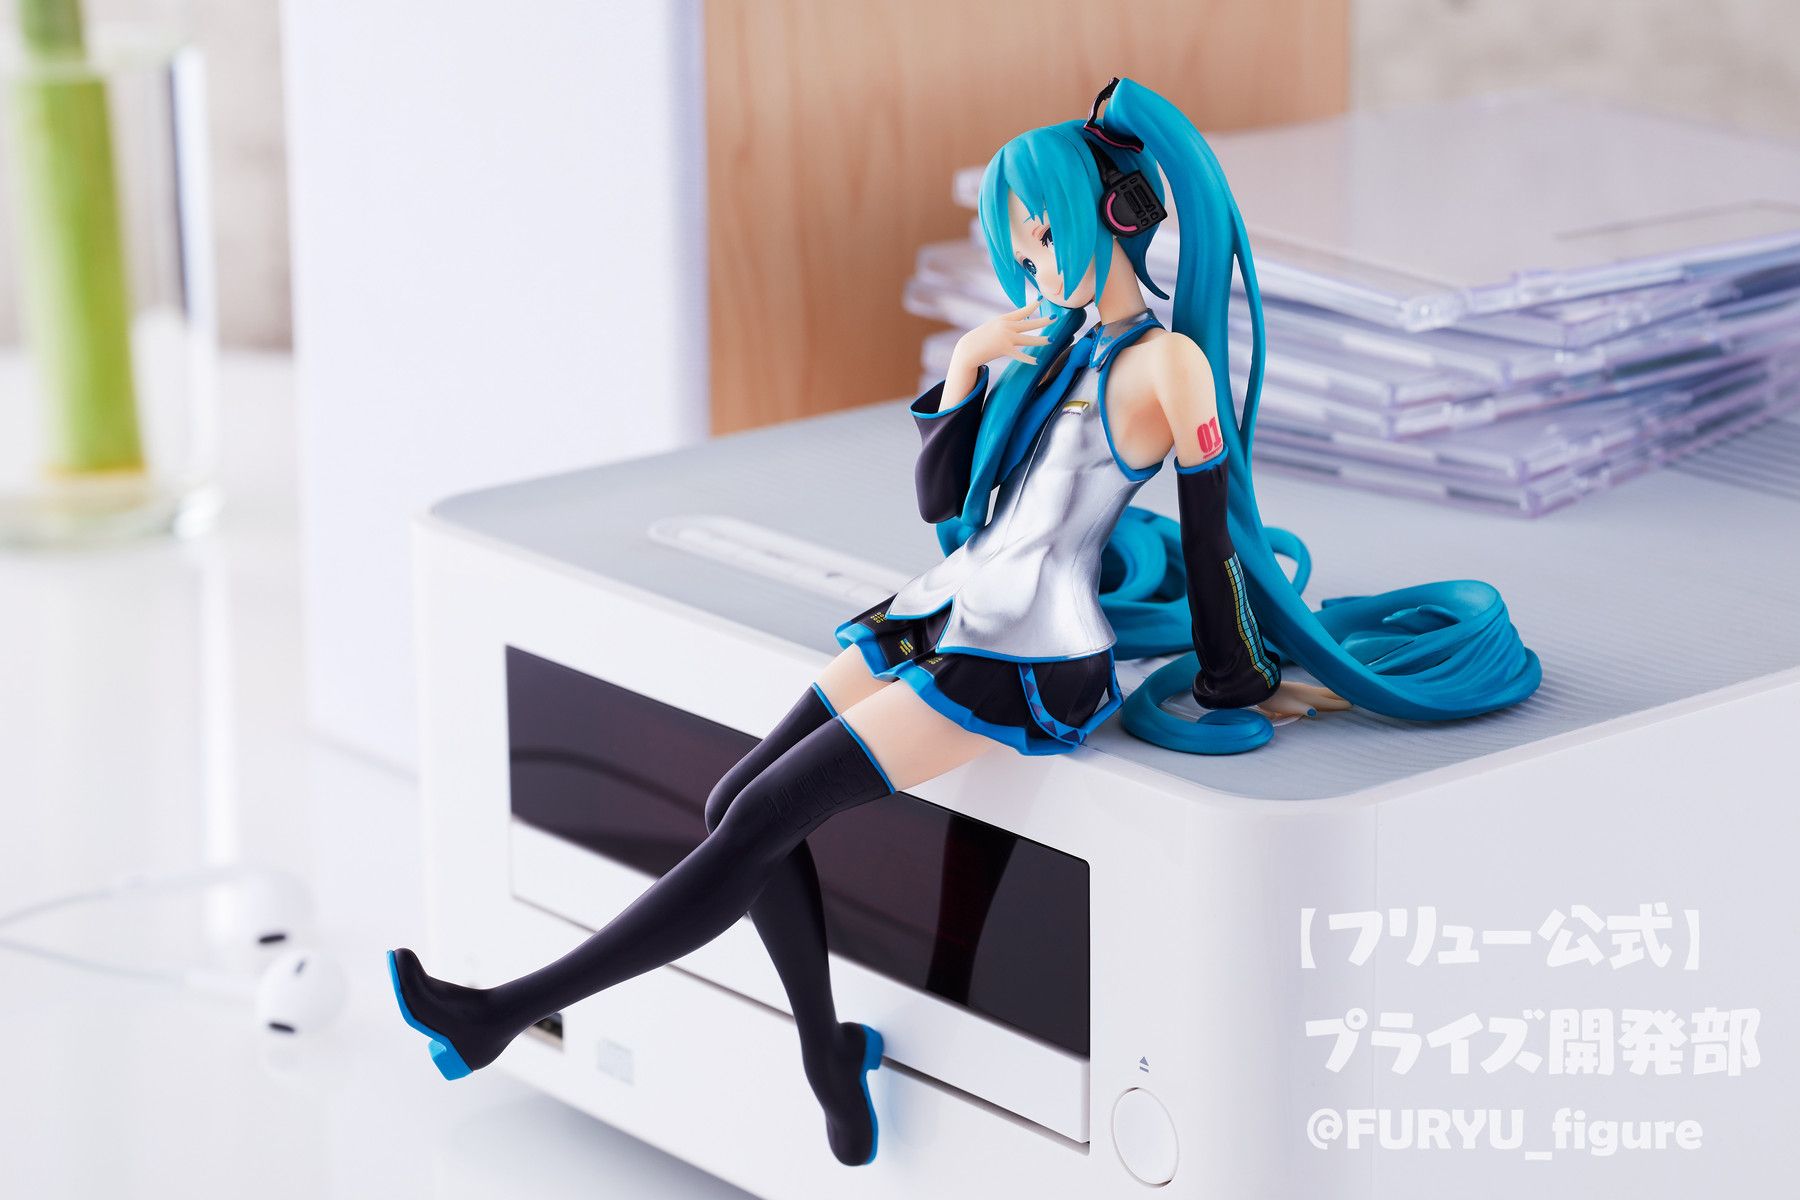 [Hatsune Miku] Nuyoru Stopper Figure, too much color and become a topic erotic 7